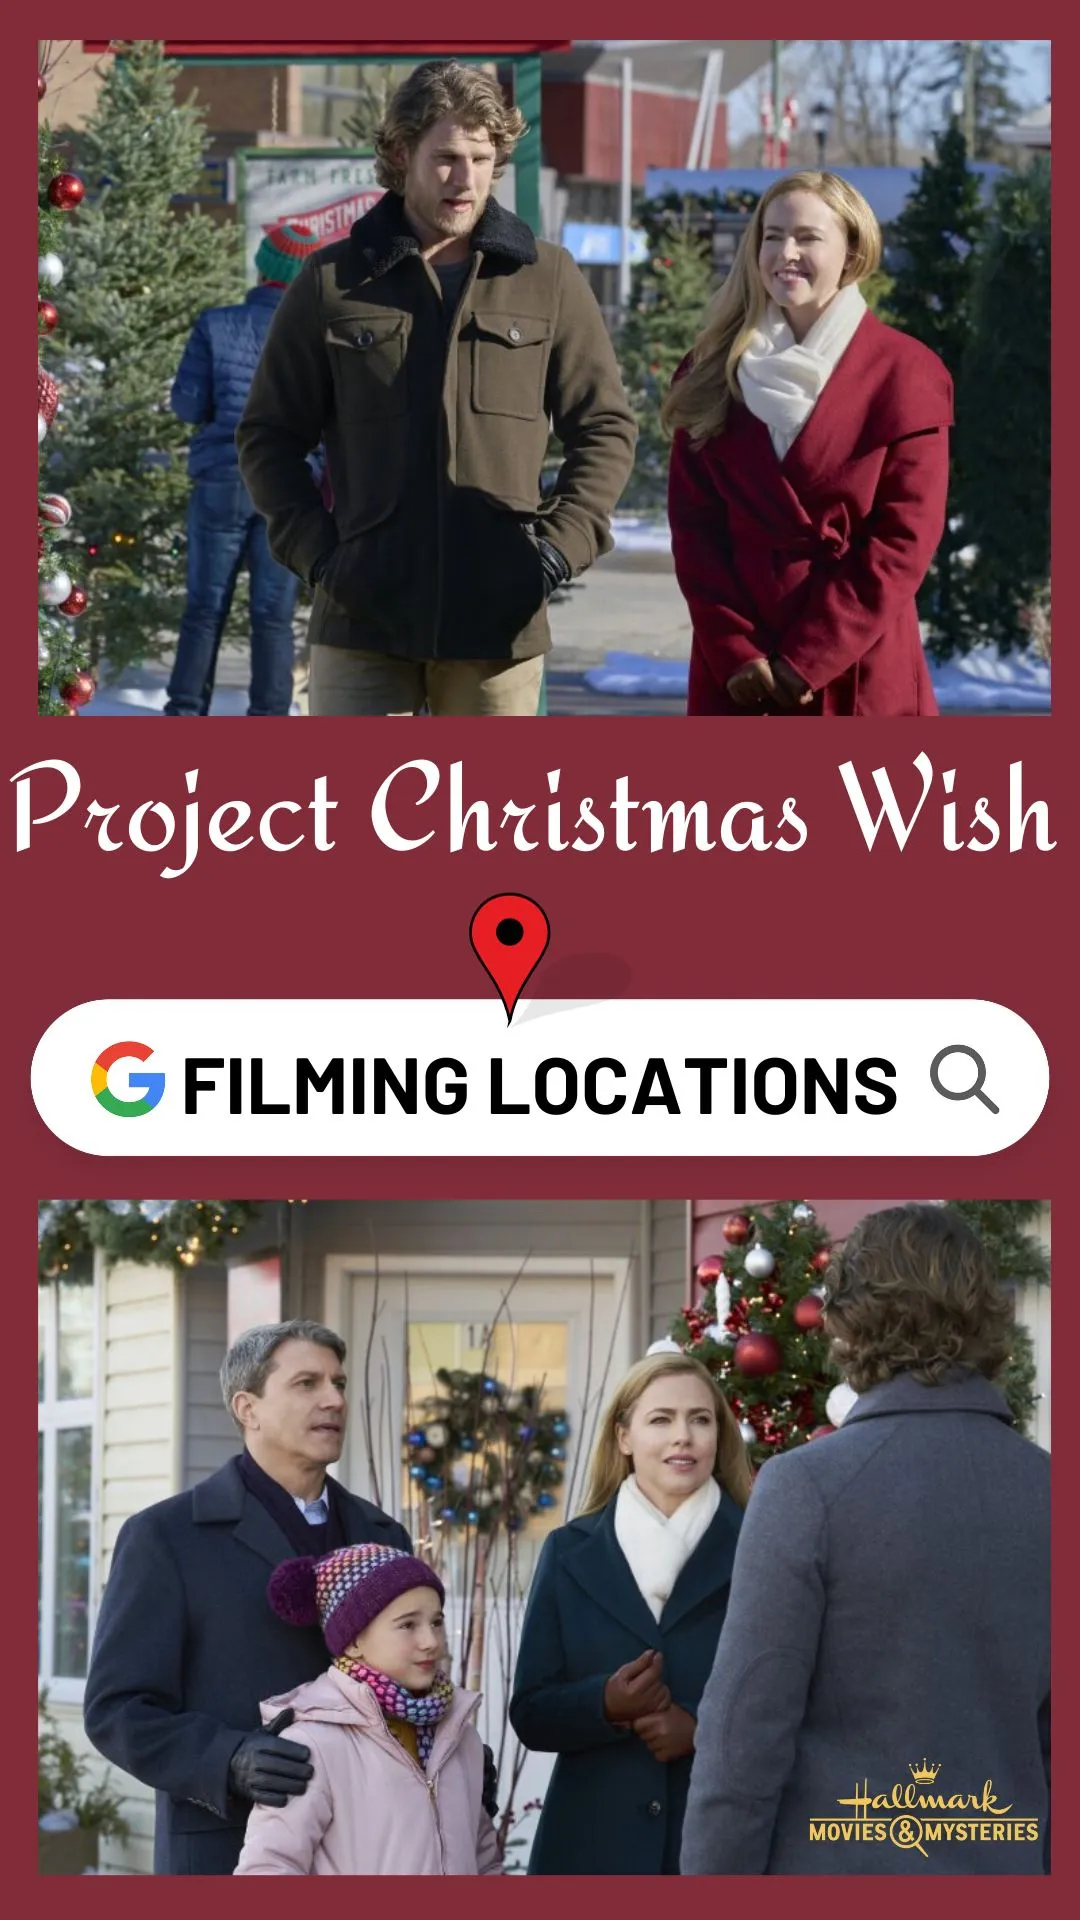 Project Christmas Wish Filming Locations